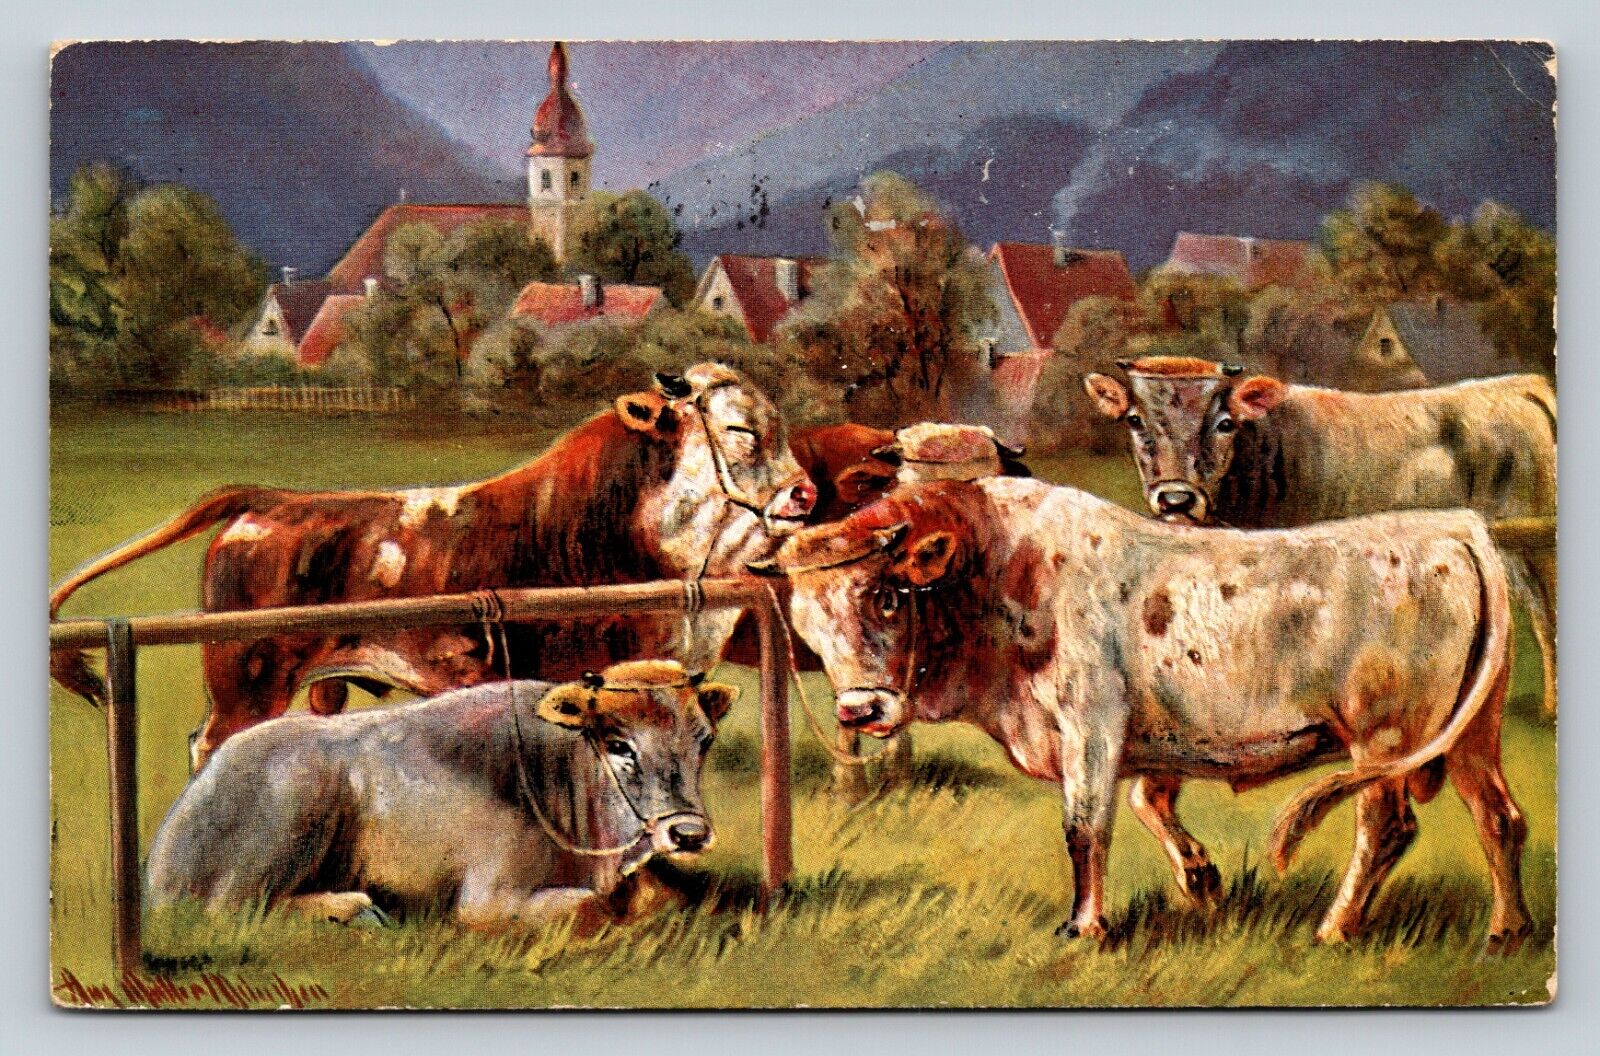 c1907 Cattle in Beautiful Country Setting ANTIQUE Postcard 1239